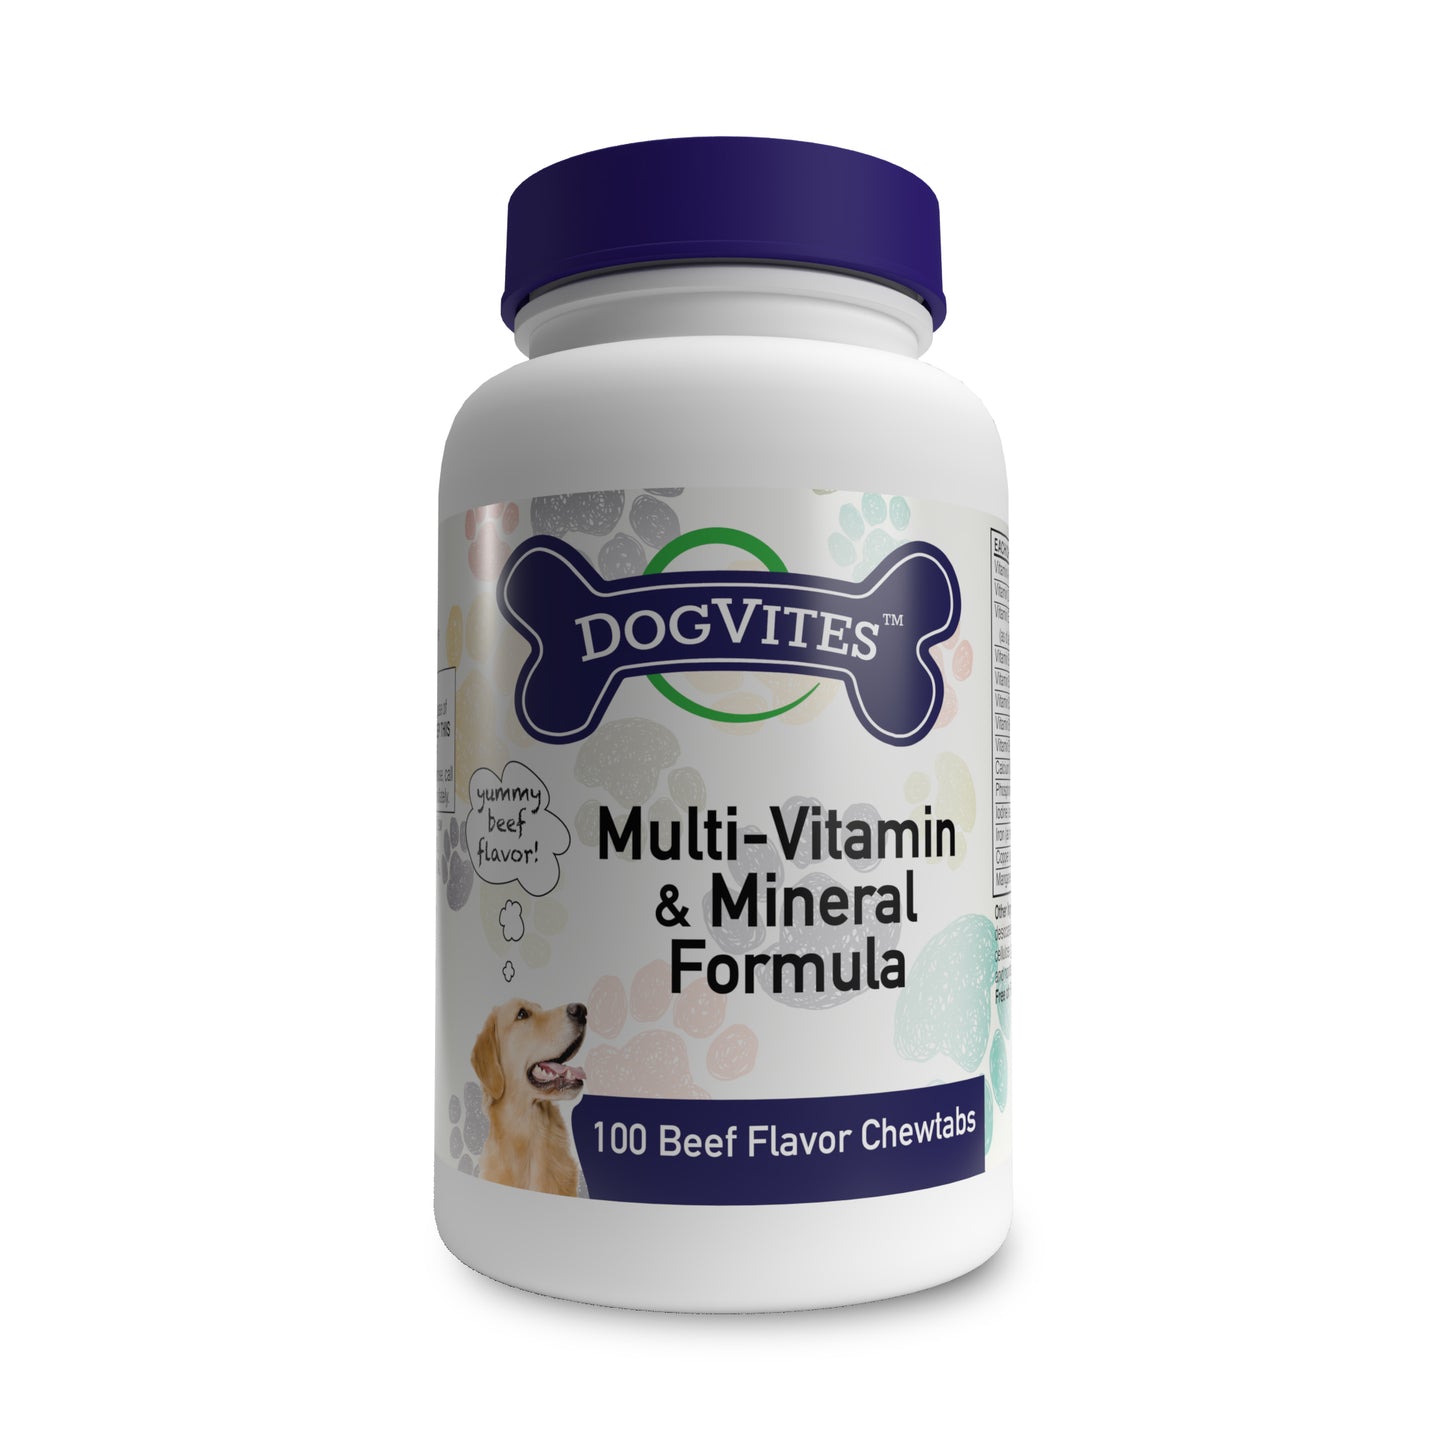 Dog-Vites™ Multi-Vitamin and Mineral Supplement for Dogs 100 Beef Flavor Chewables